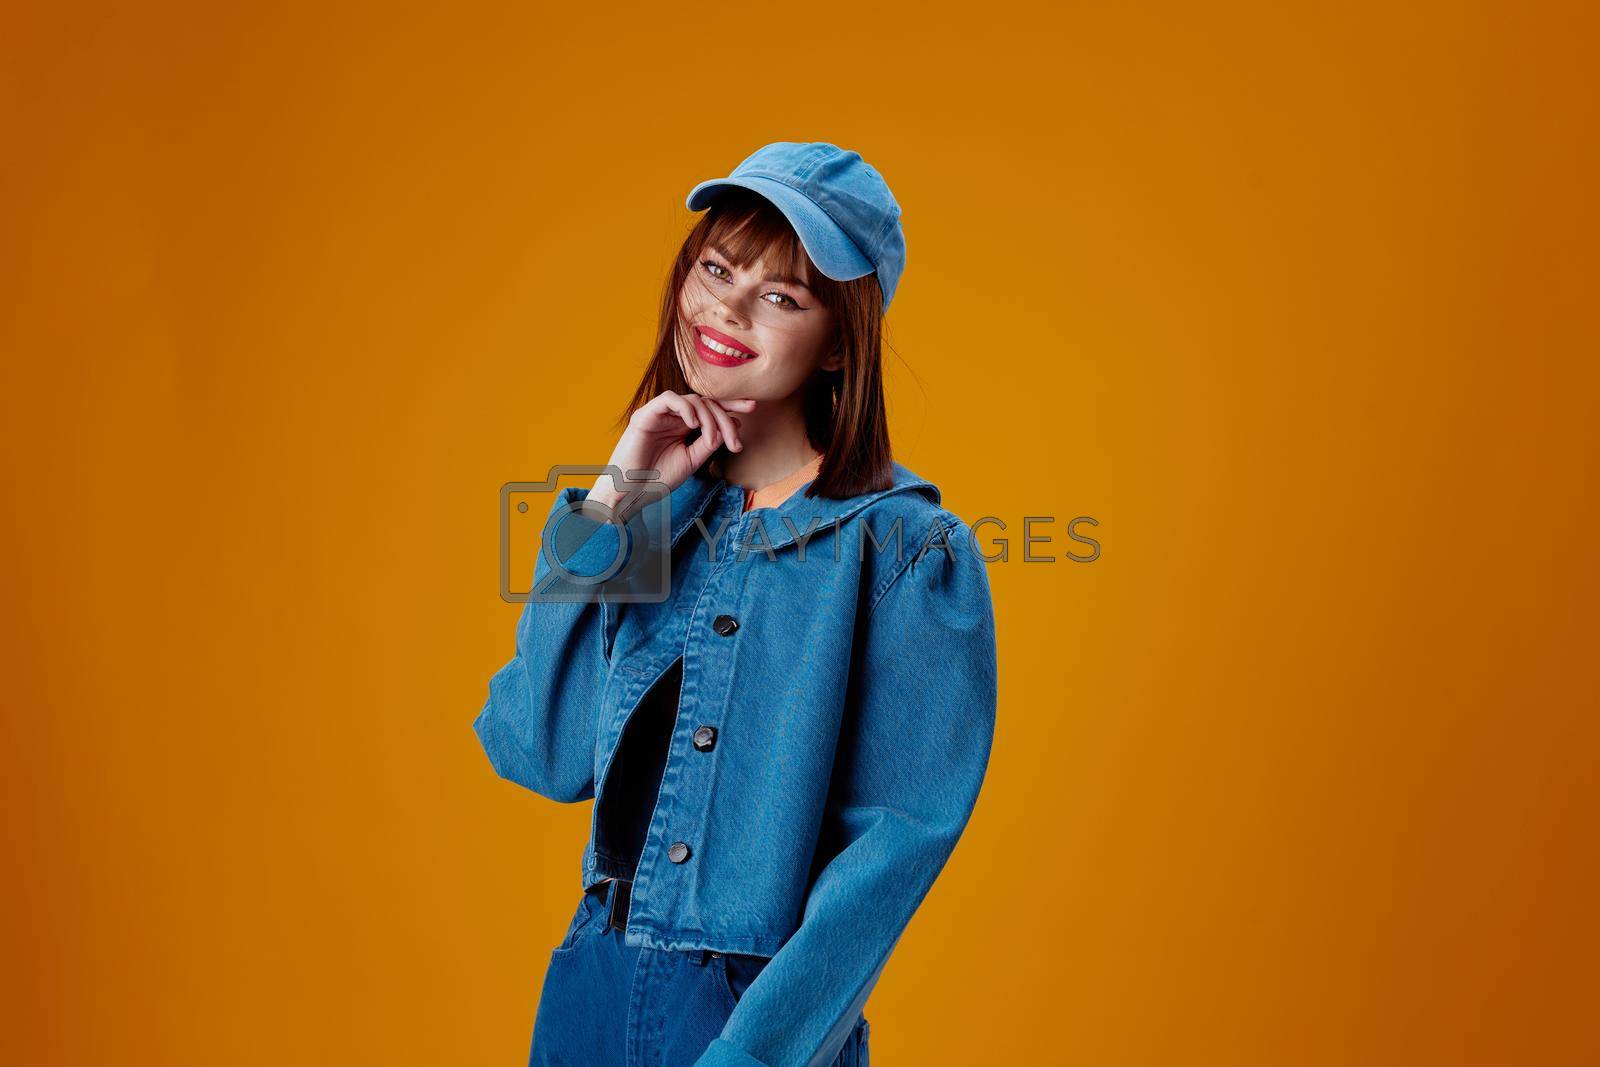 Beauty Fashion woman denim clothing fashion posing cap color background unaltered. High quality photo